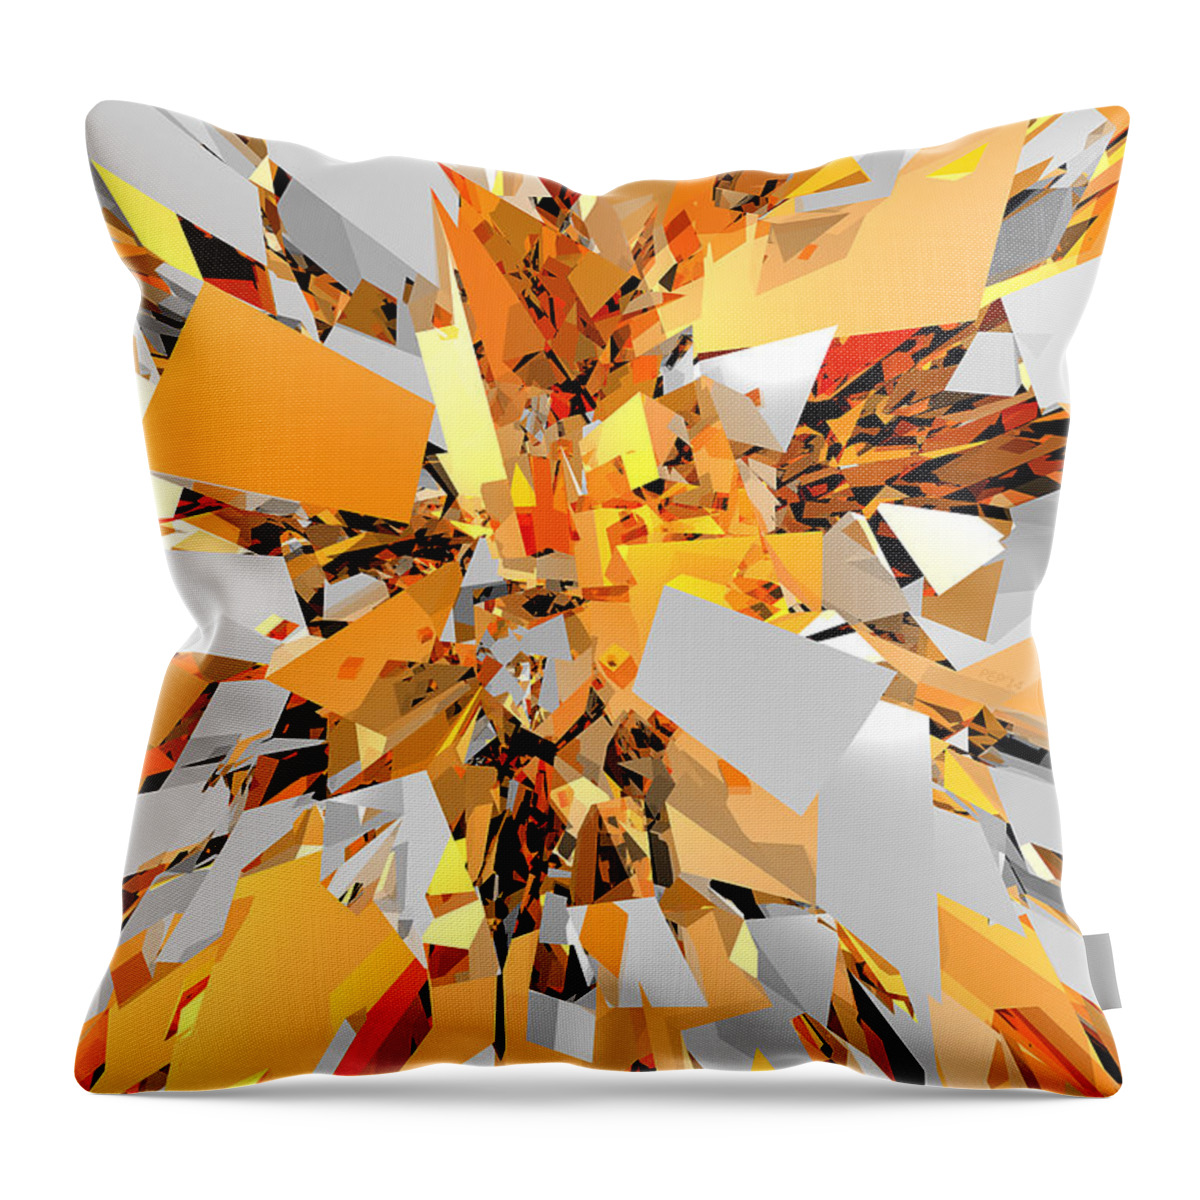 Orange Throw Pillow featuring the digital art Abstract Orange Shapes Cluster by Phil Perkins